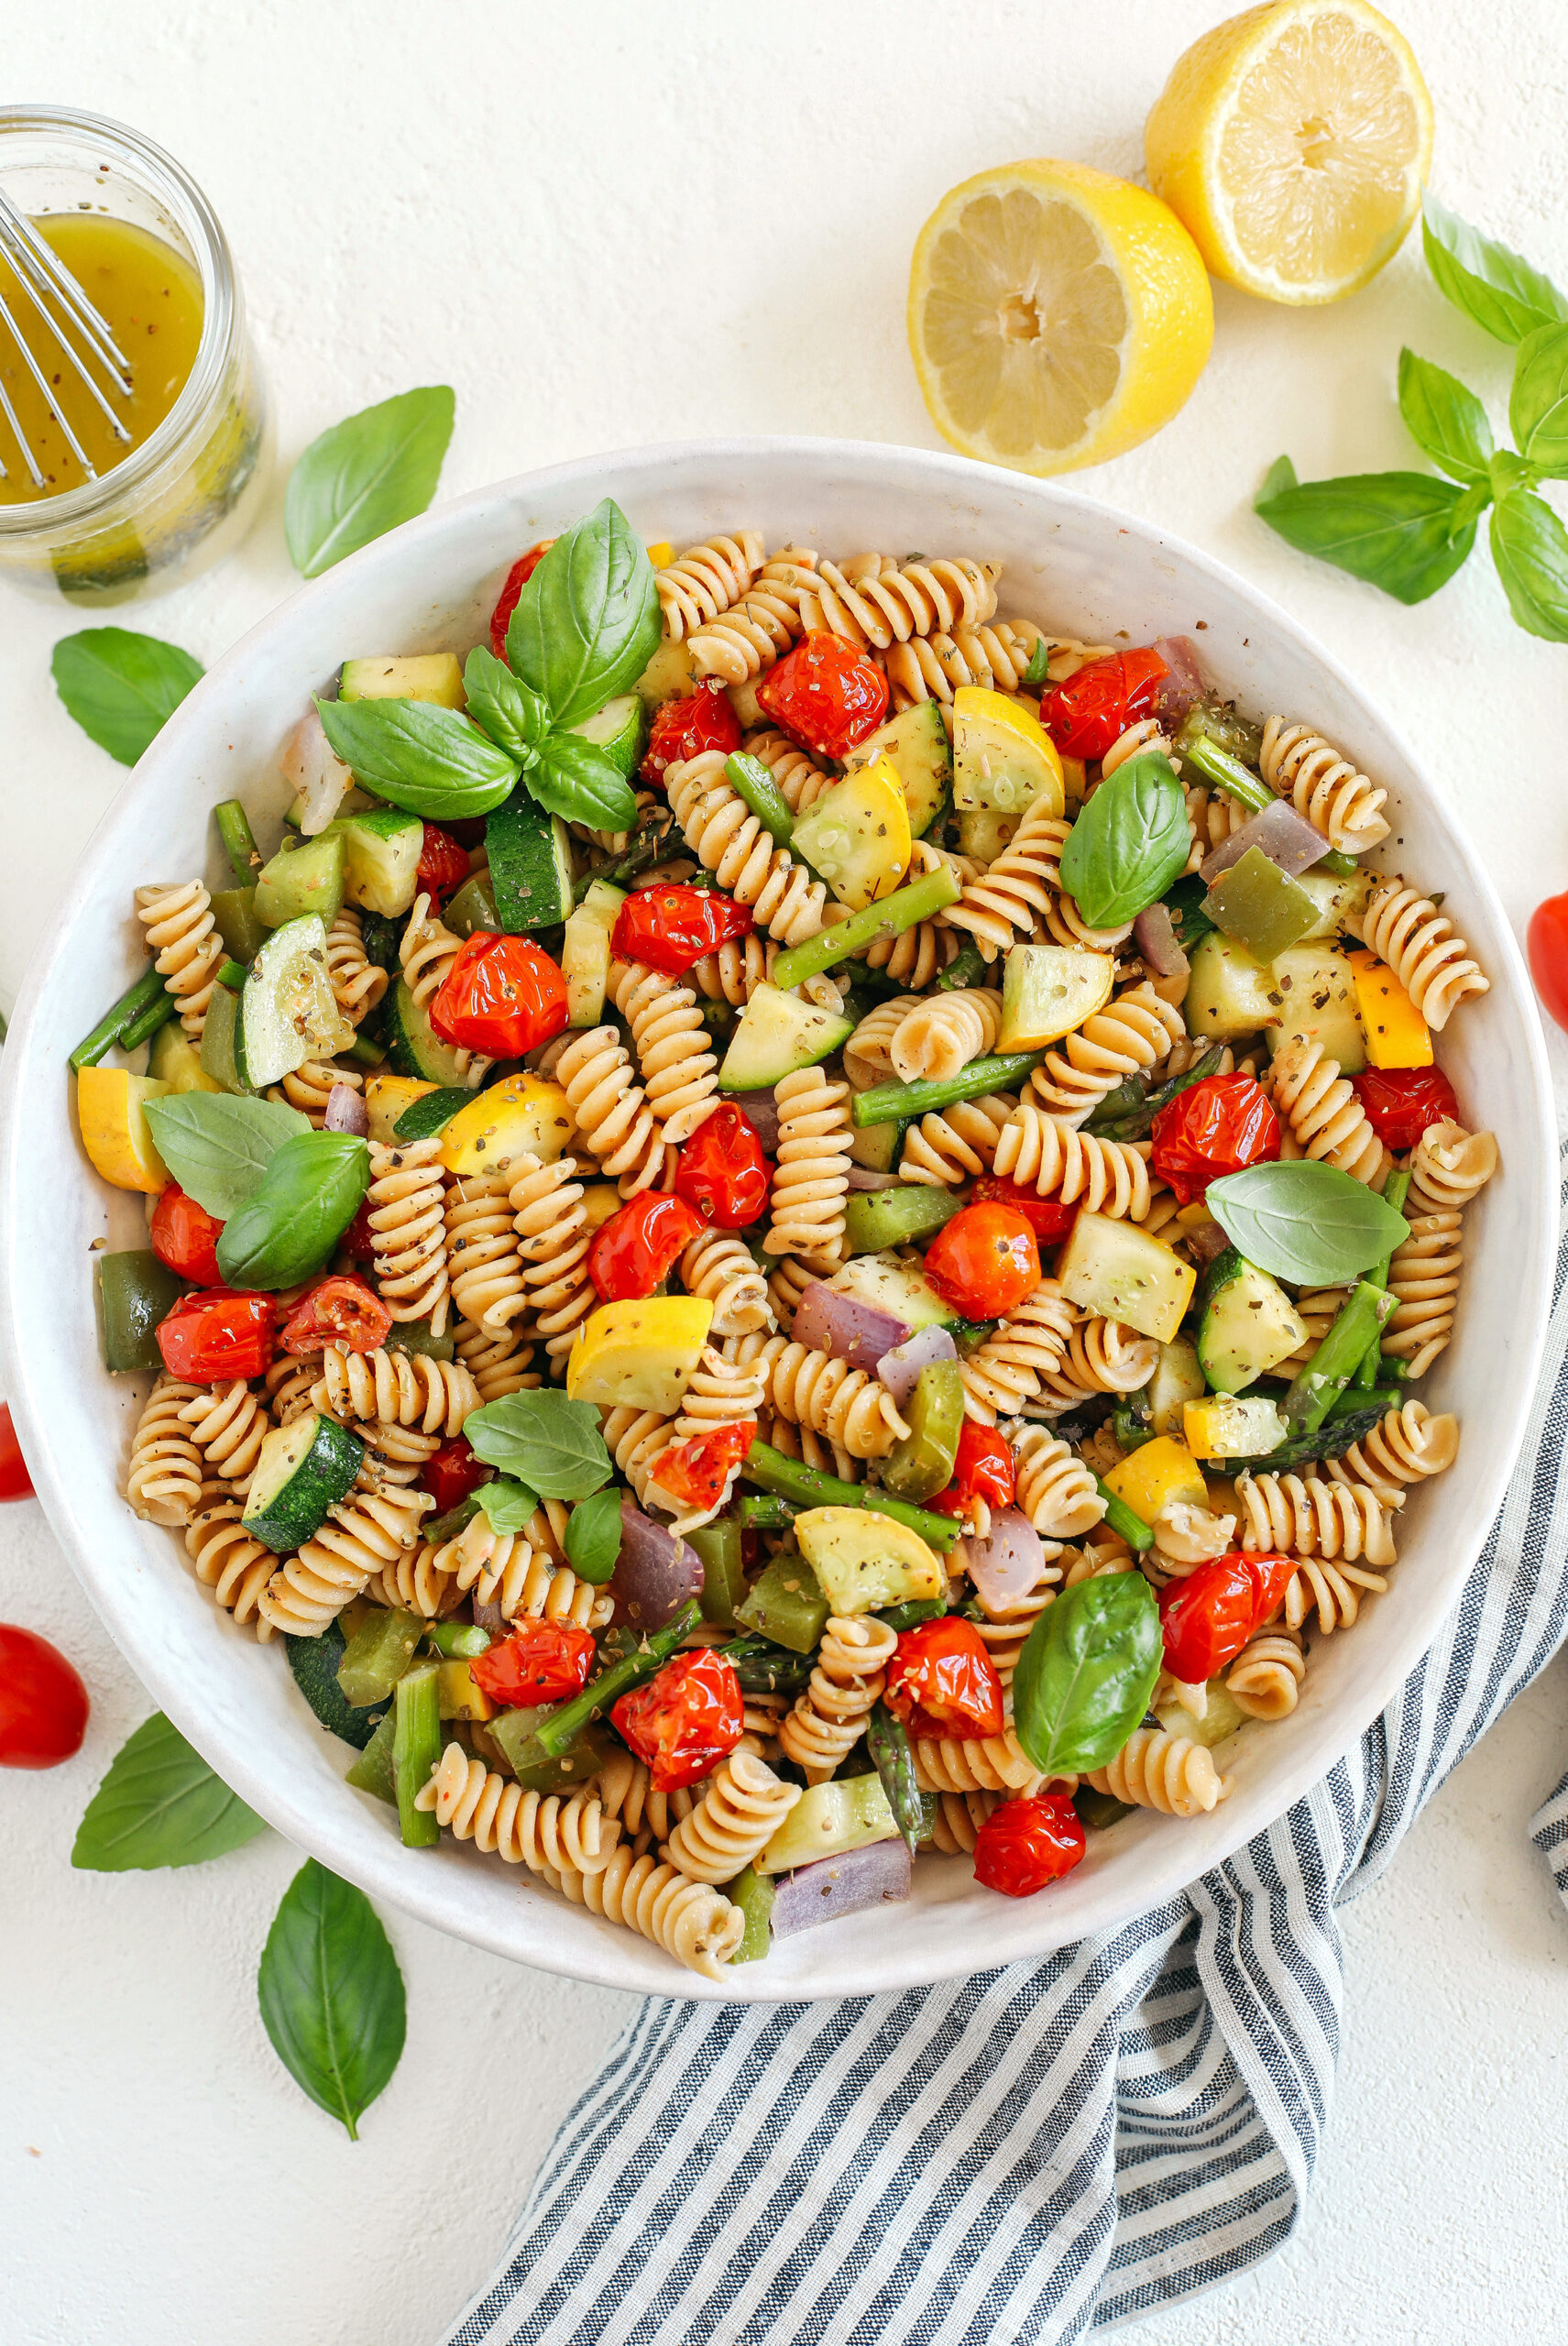 This EASY Roasted Veggie Pasta Salad is loaded with fresh ingredients like juicy tomatoes, zucchini, squash, asparagus, and bell pepper, all tossed together with a delicious lemon herb dressing!